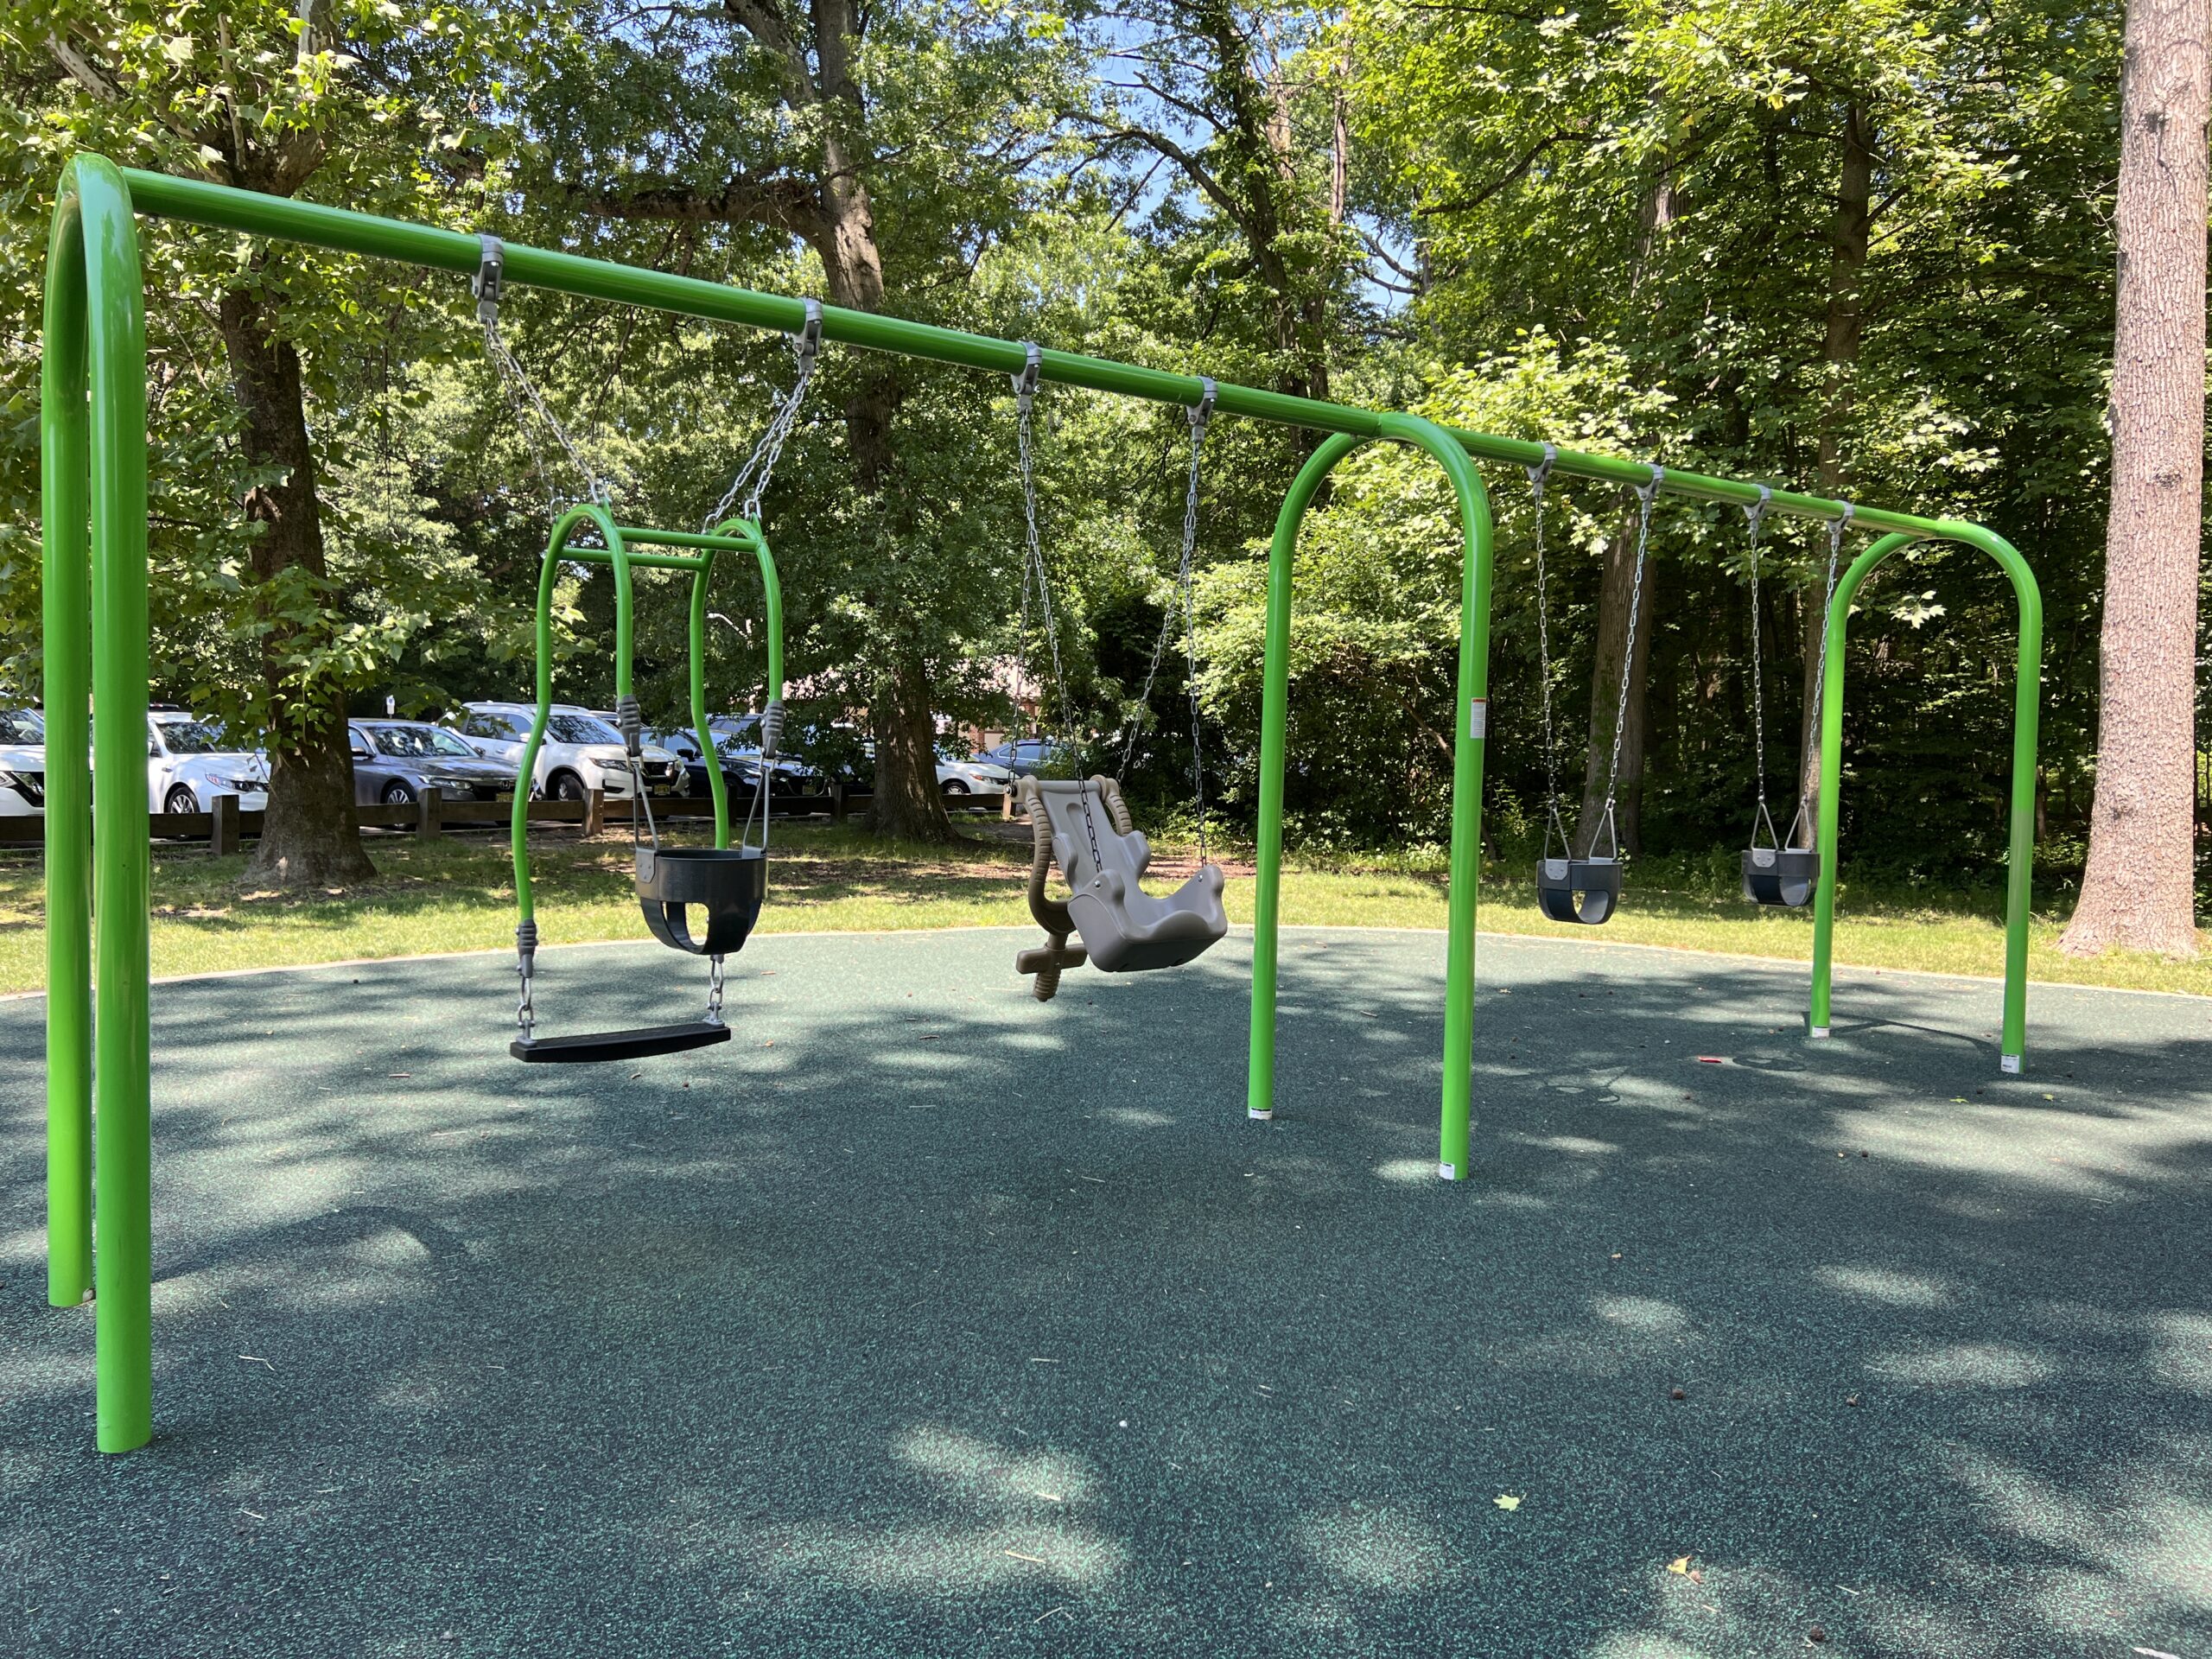 Nomahegan Park Playground in Cranford NJ - Swings - baby swings, accessible swing, companion swing WIDE image